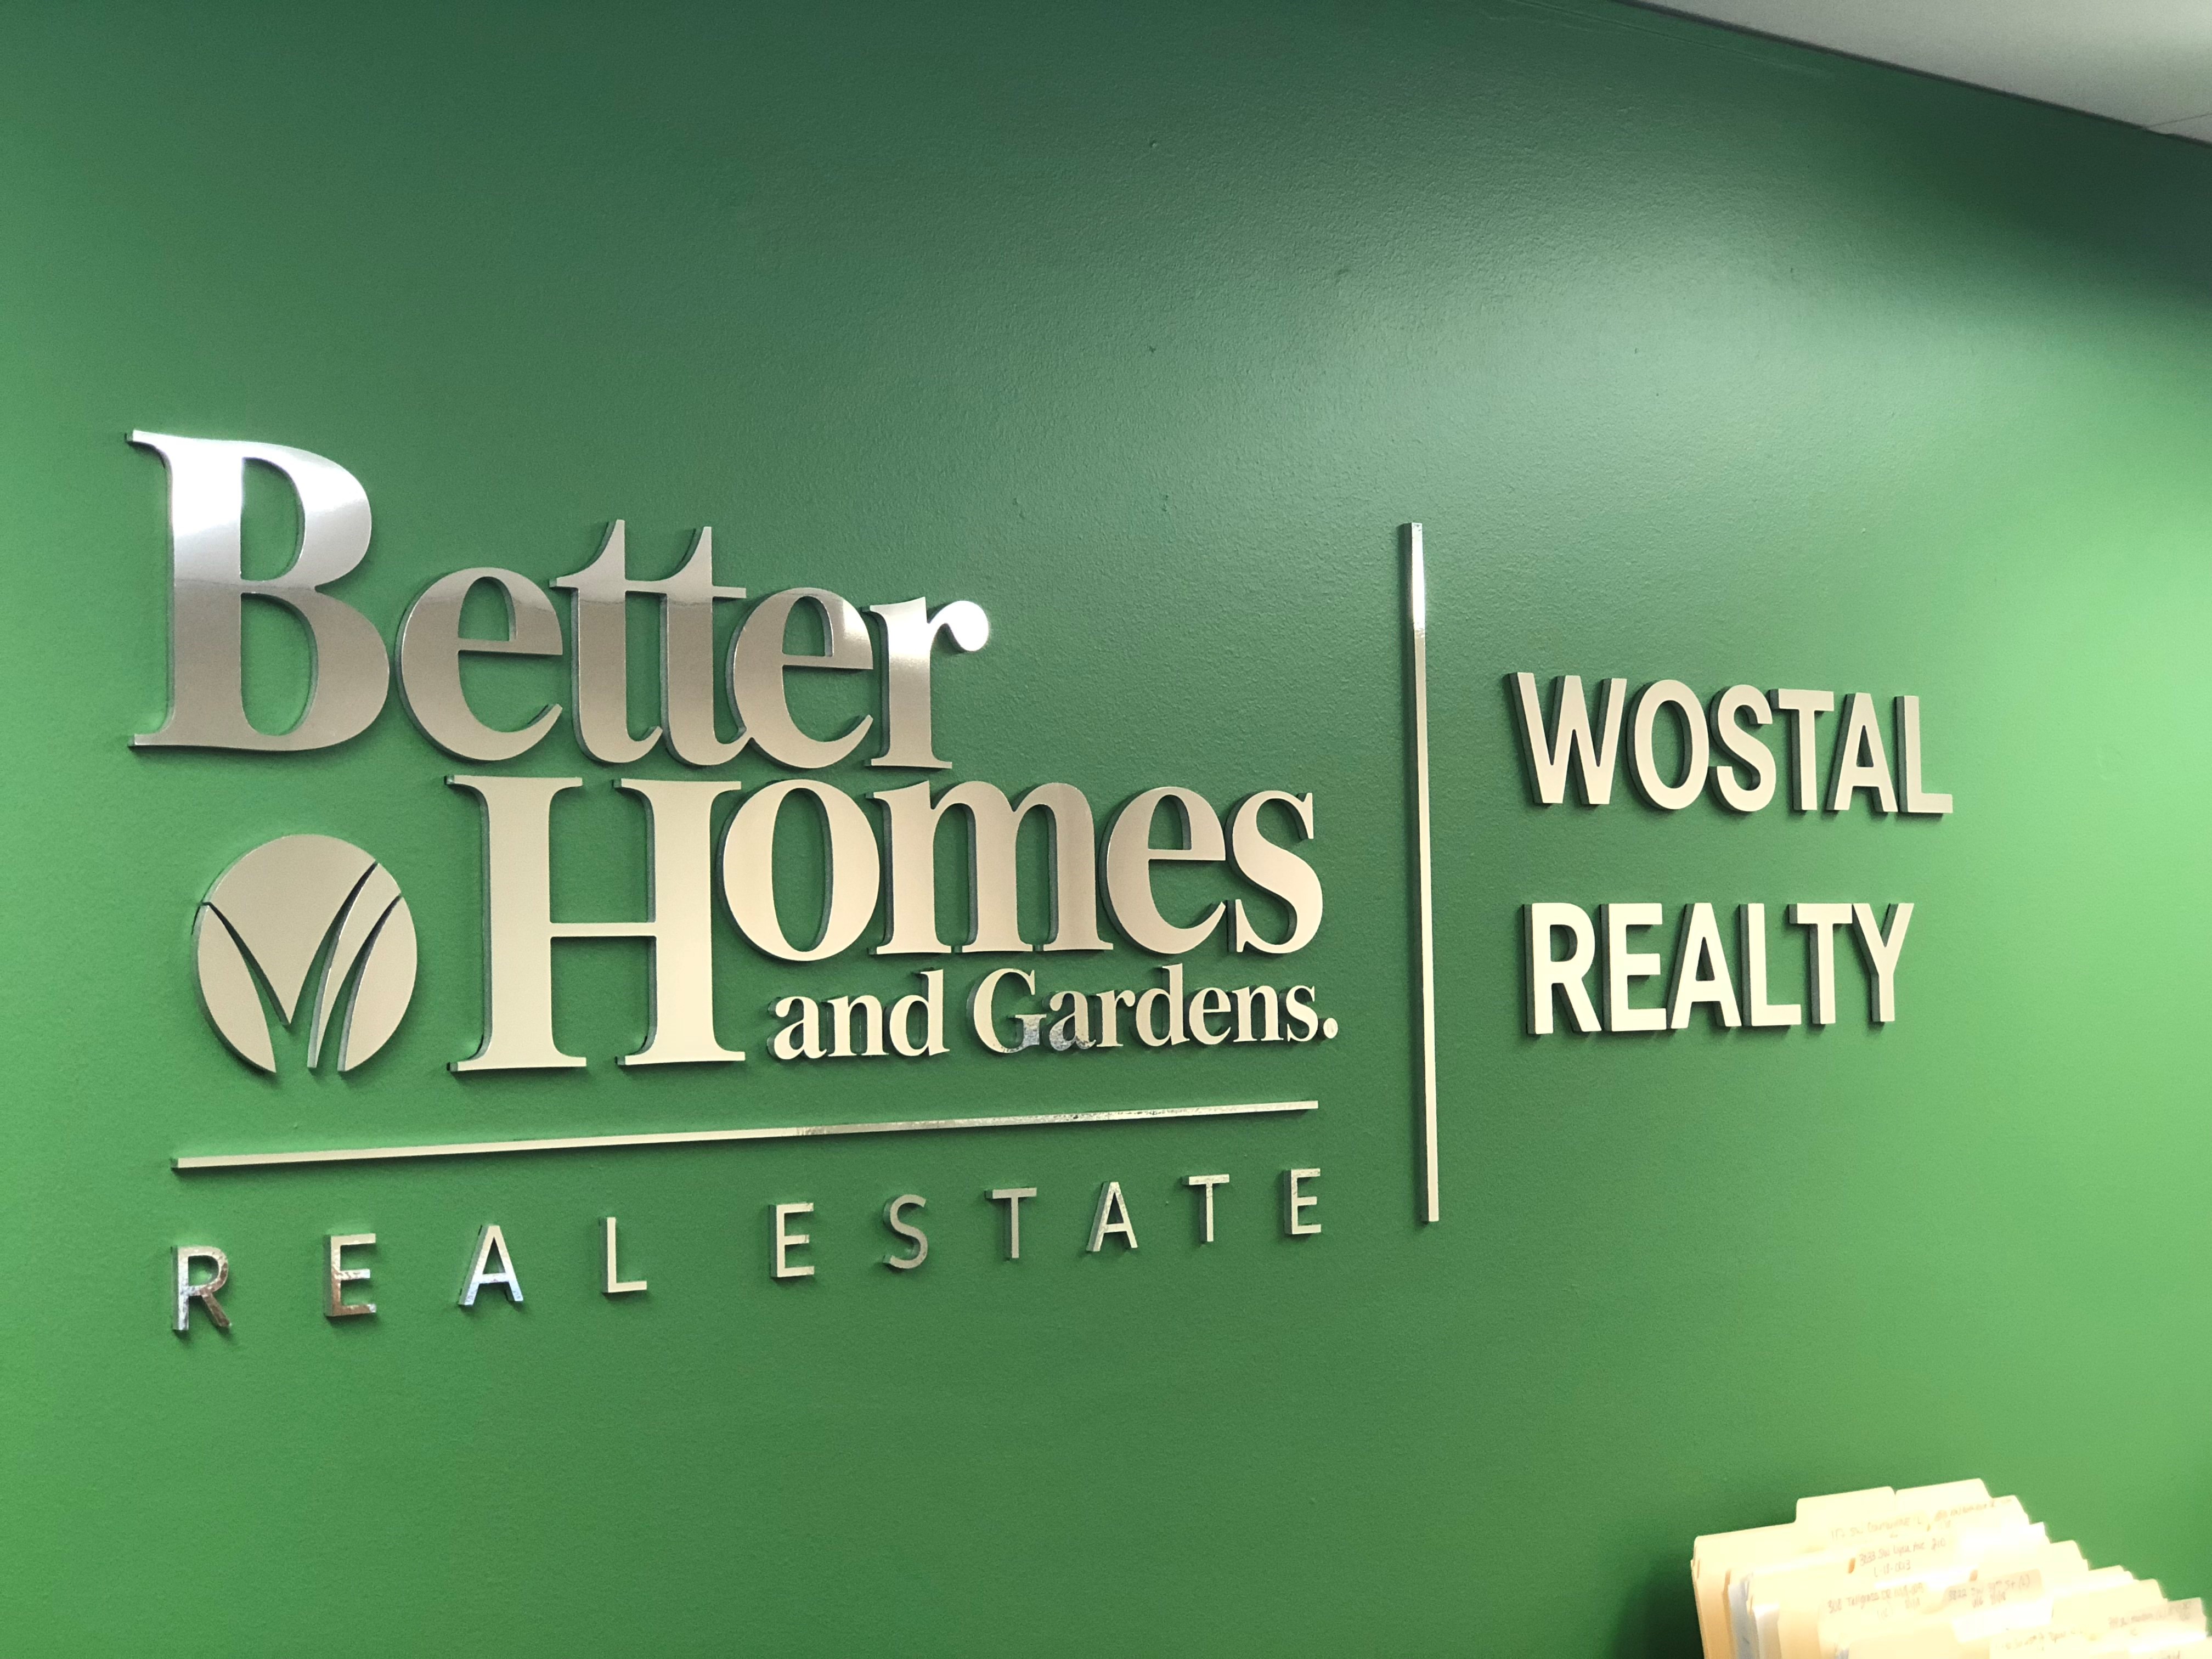 Better Homes and Gardens Real Estate Wostal Realty Photo